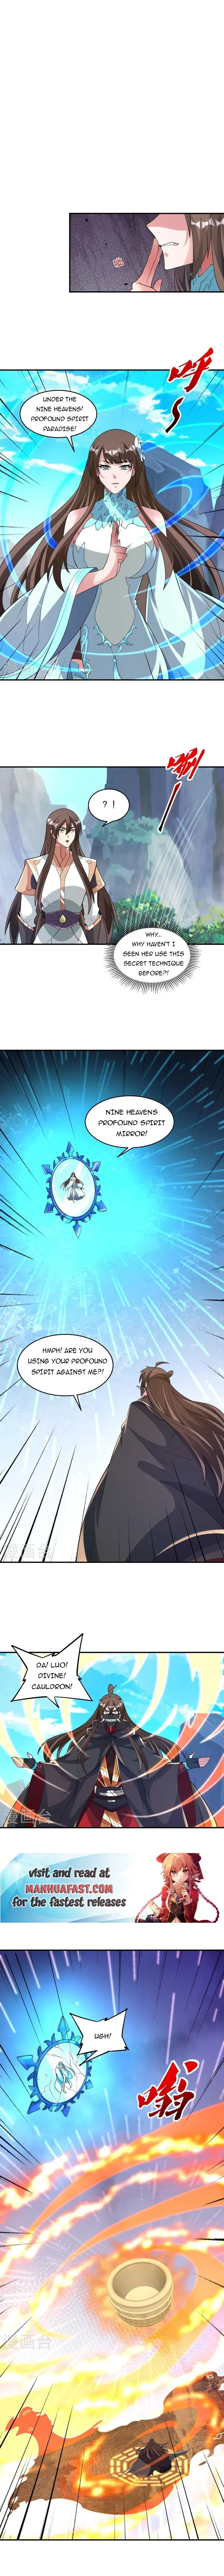 Banished Disciple's Counterattack Chapter 377 page 6